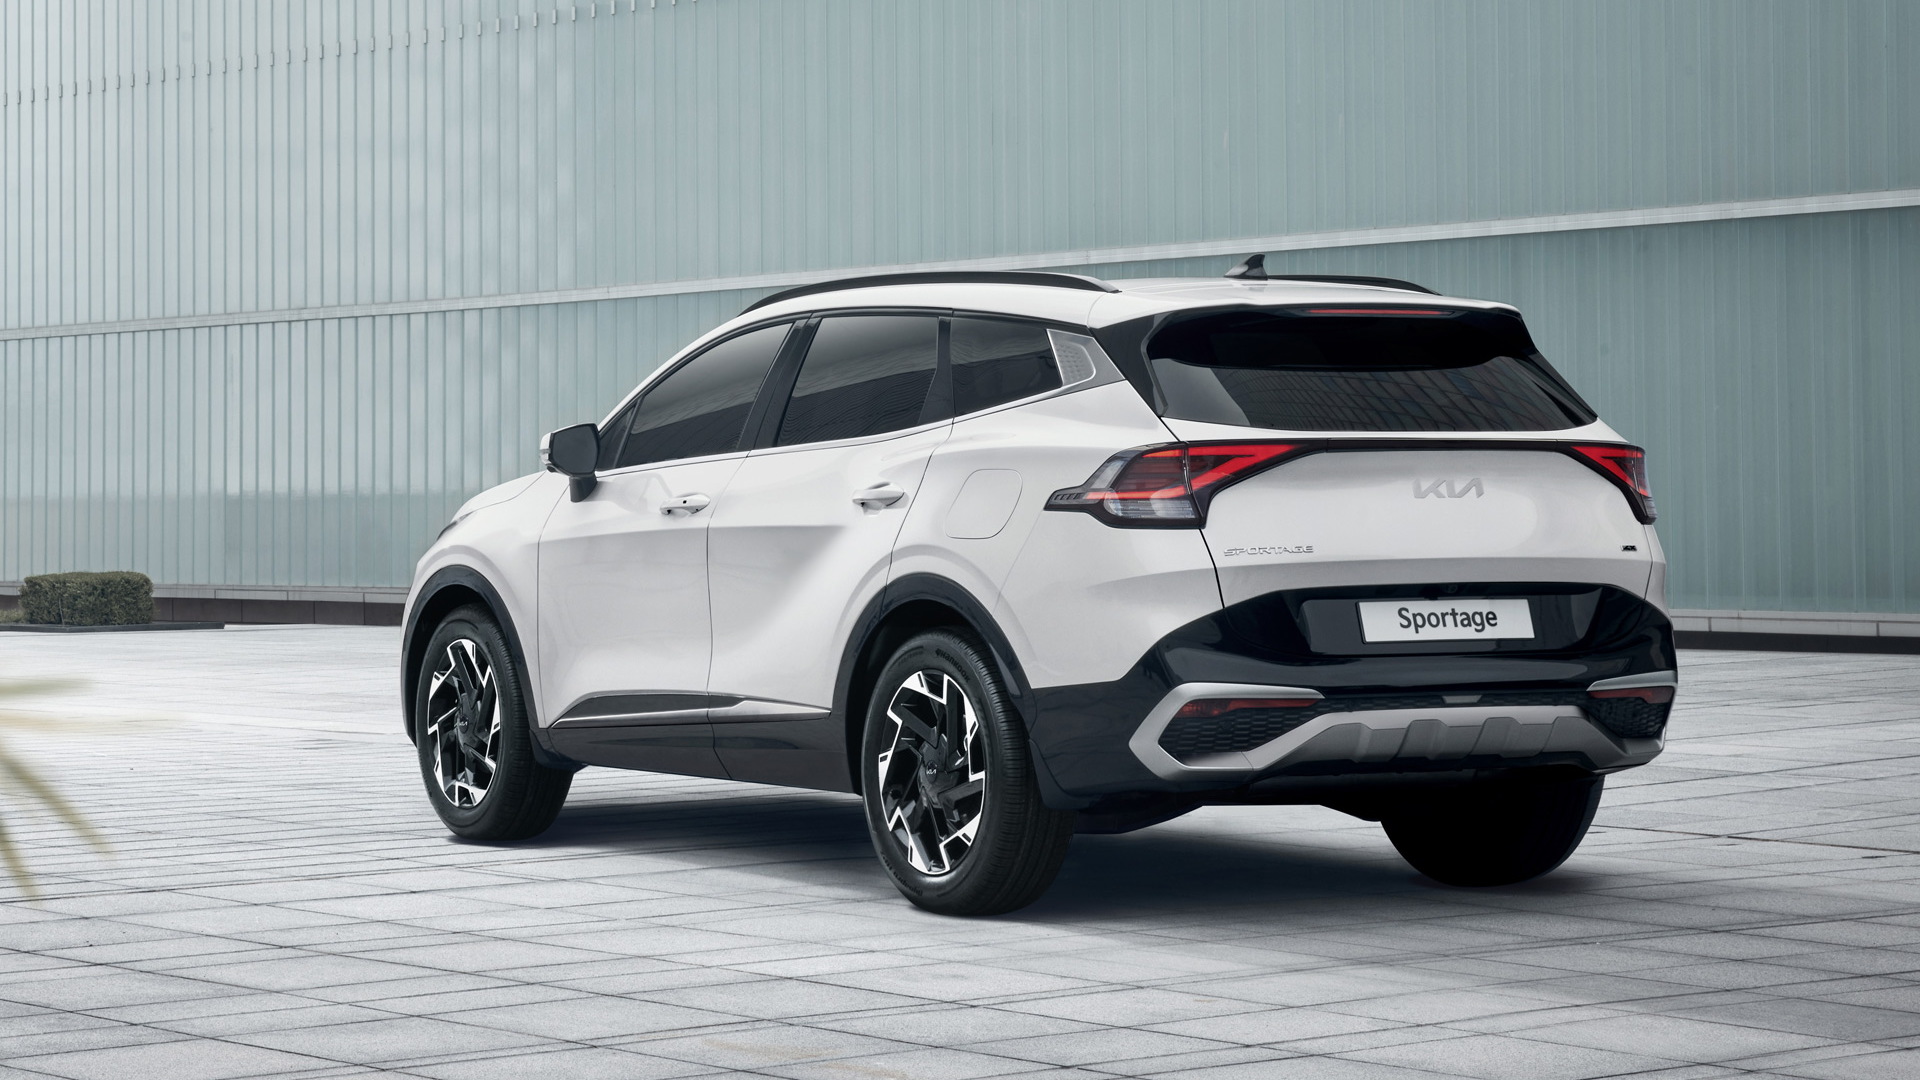 Kia Car Models 2023 Sportage Crossover Compact Introduced Opposites